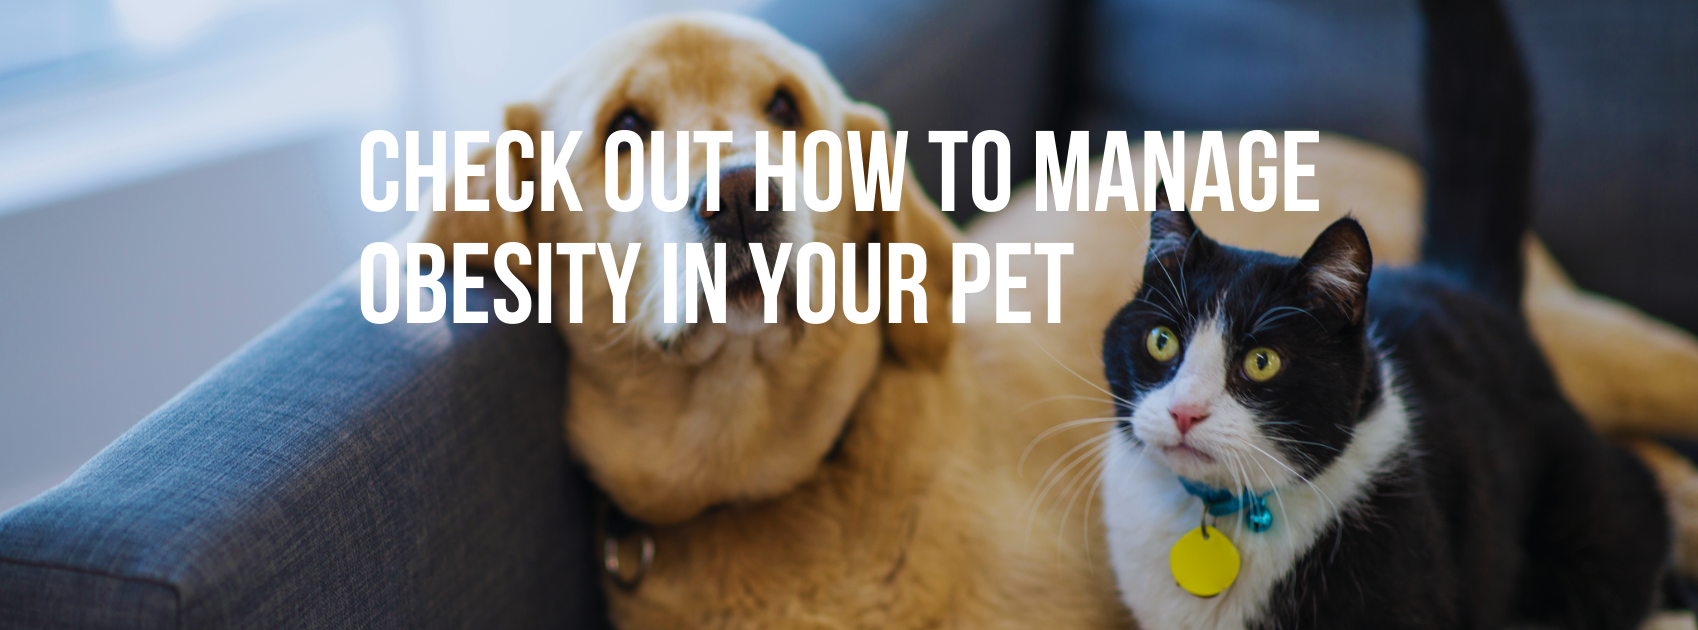 CHECK OUT HOW TO MANAGE OBESITY IN YOUR PET